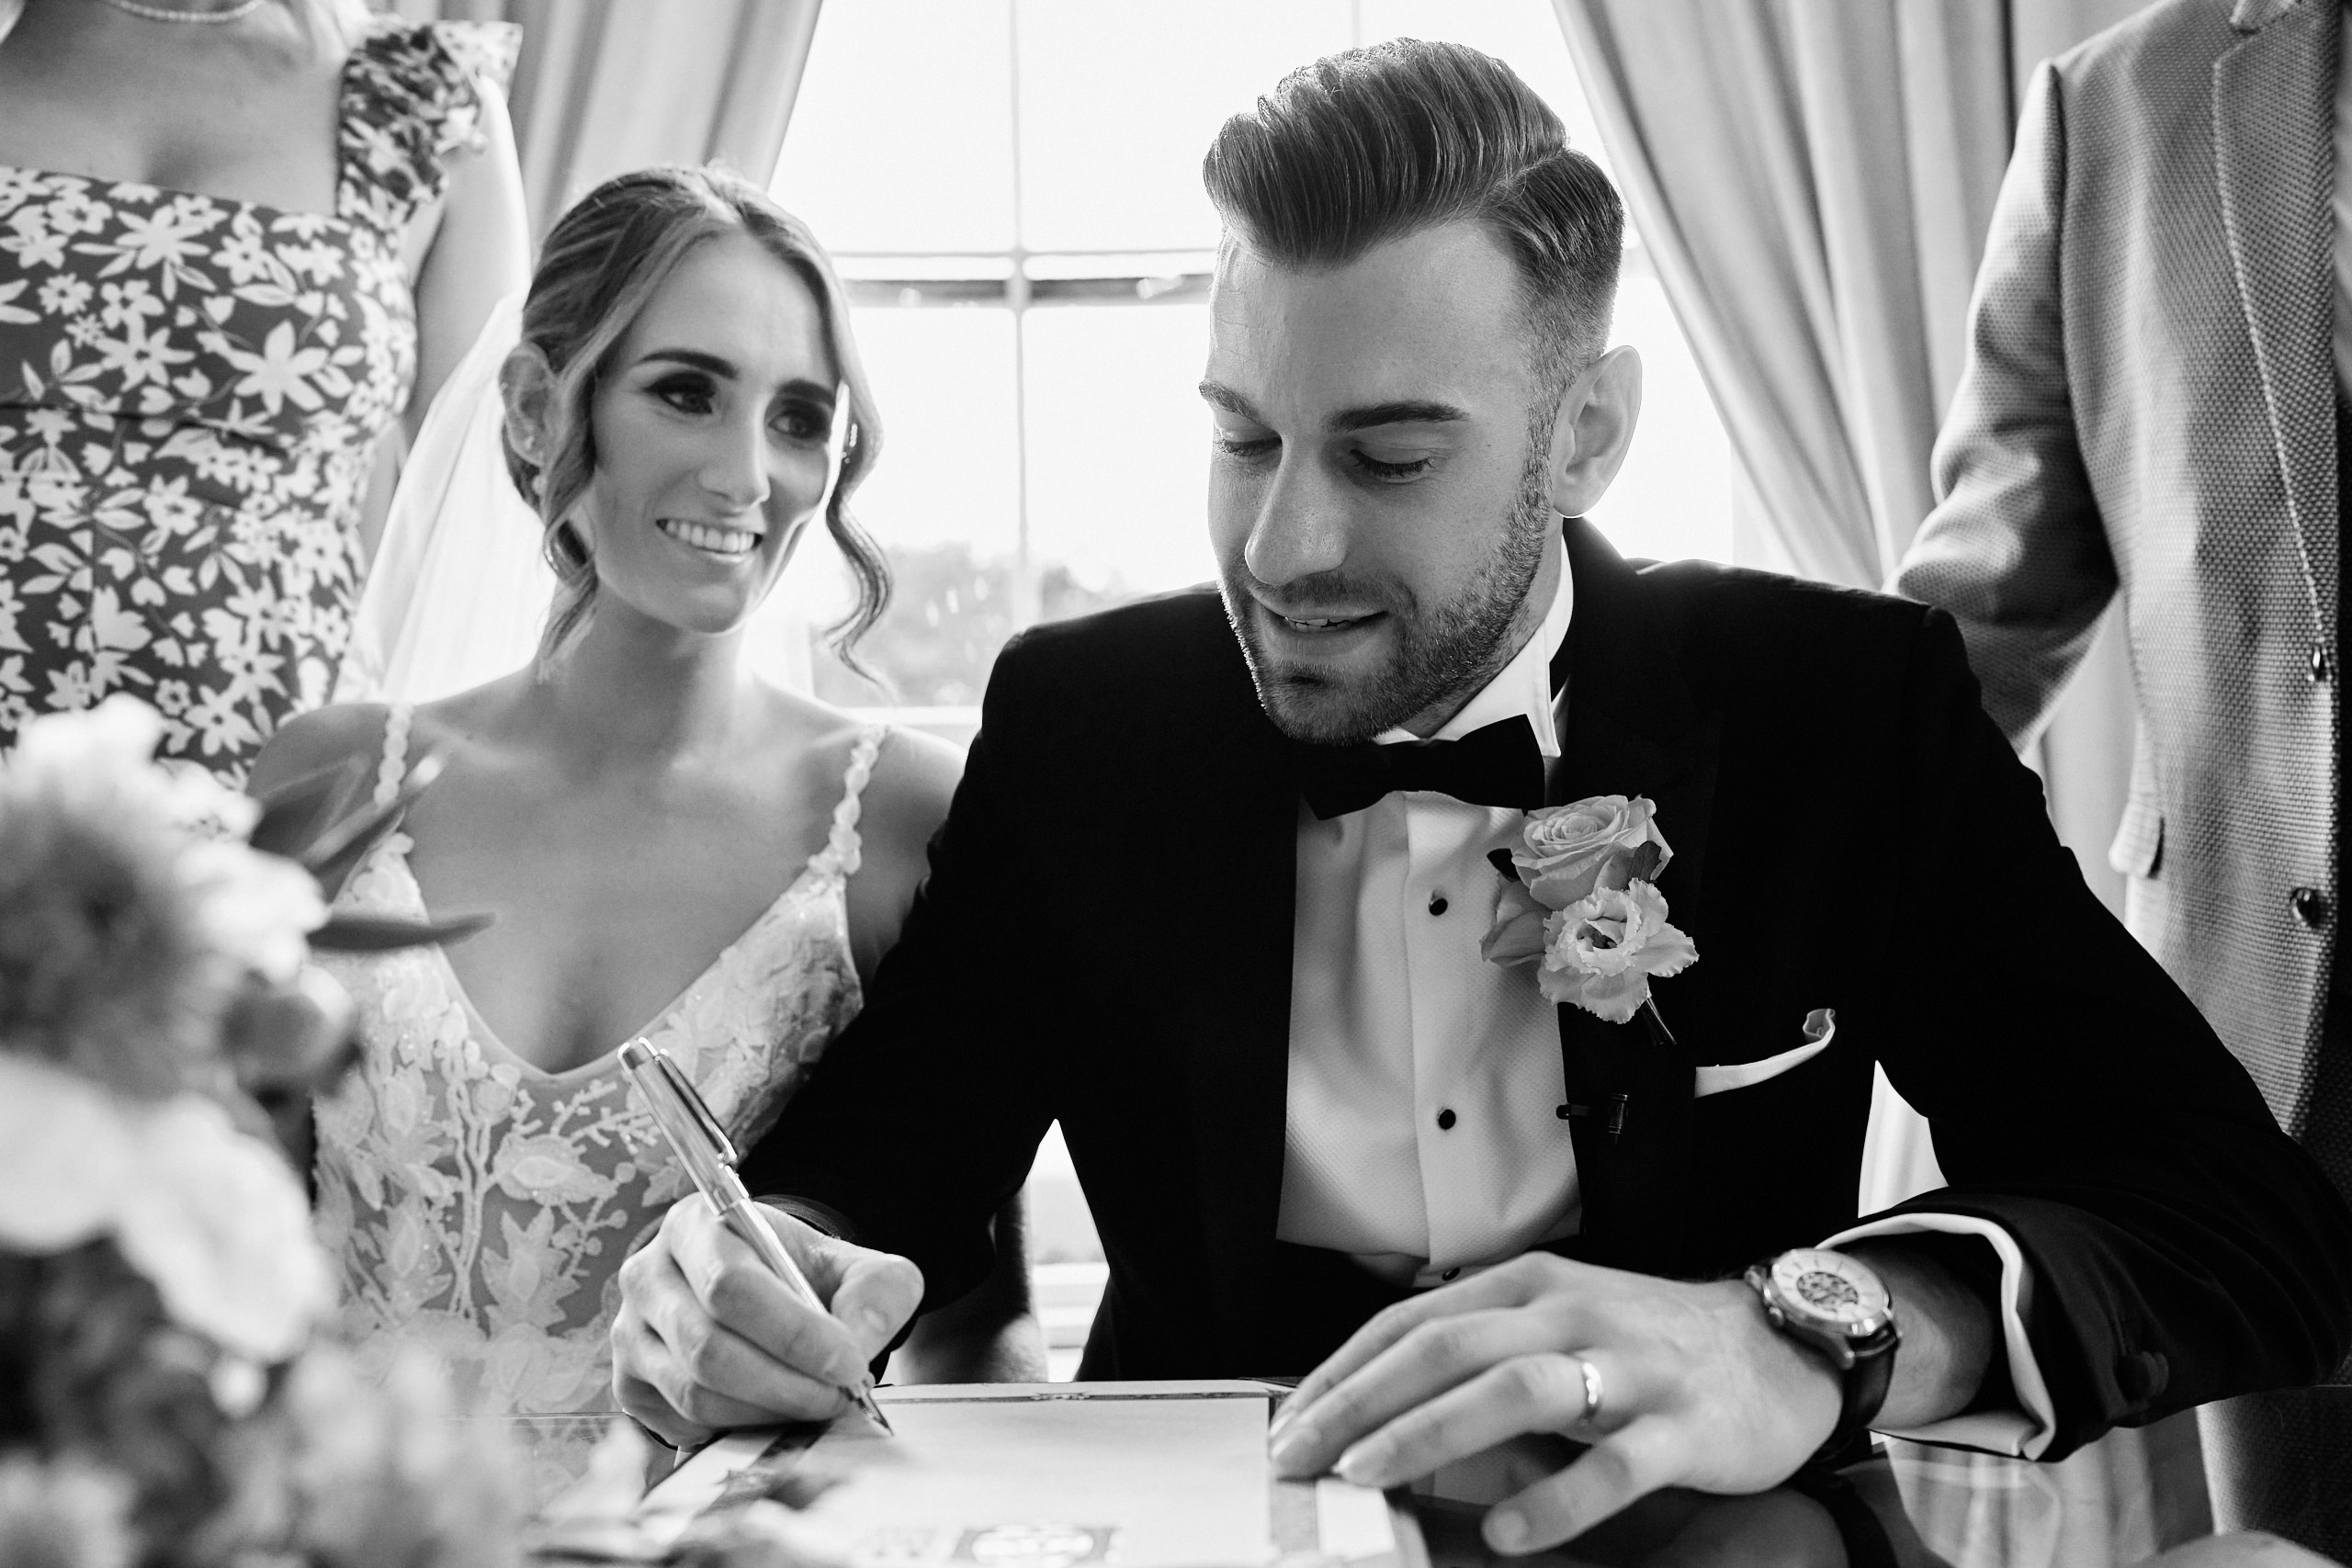 A bride and groom signing their wedding vows.